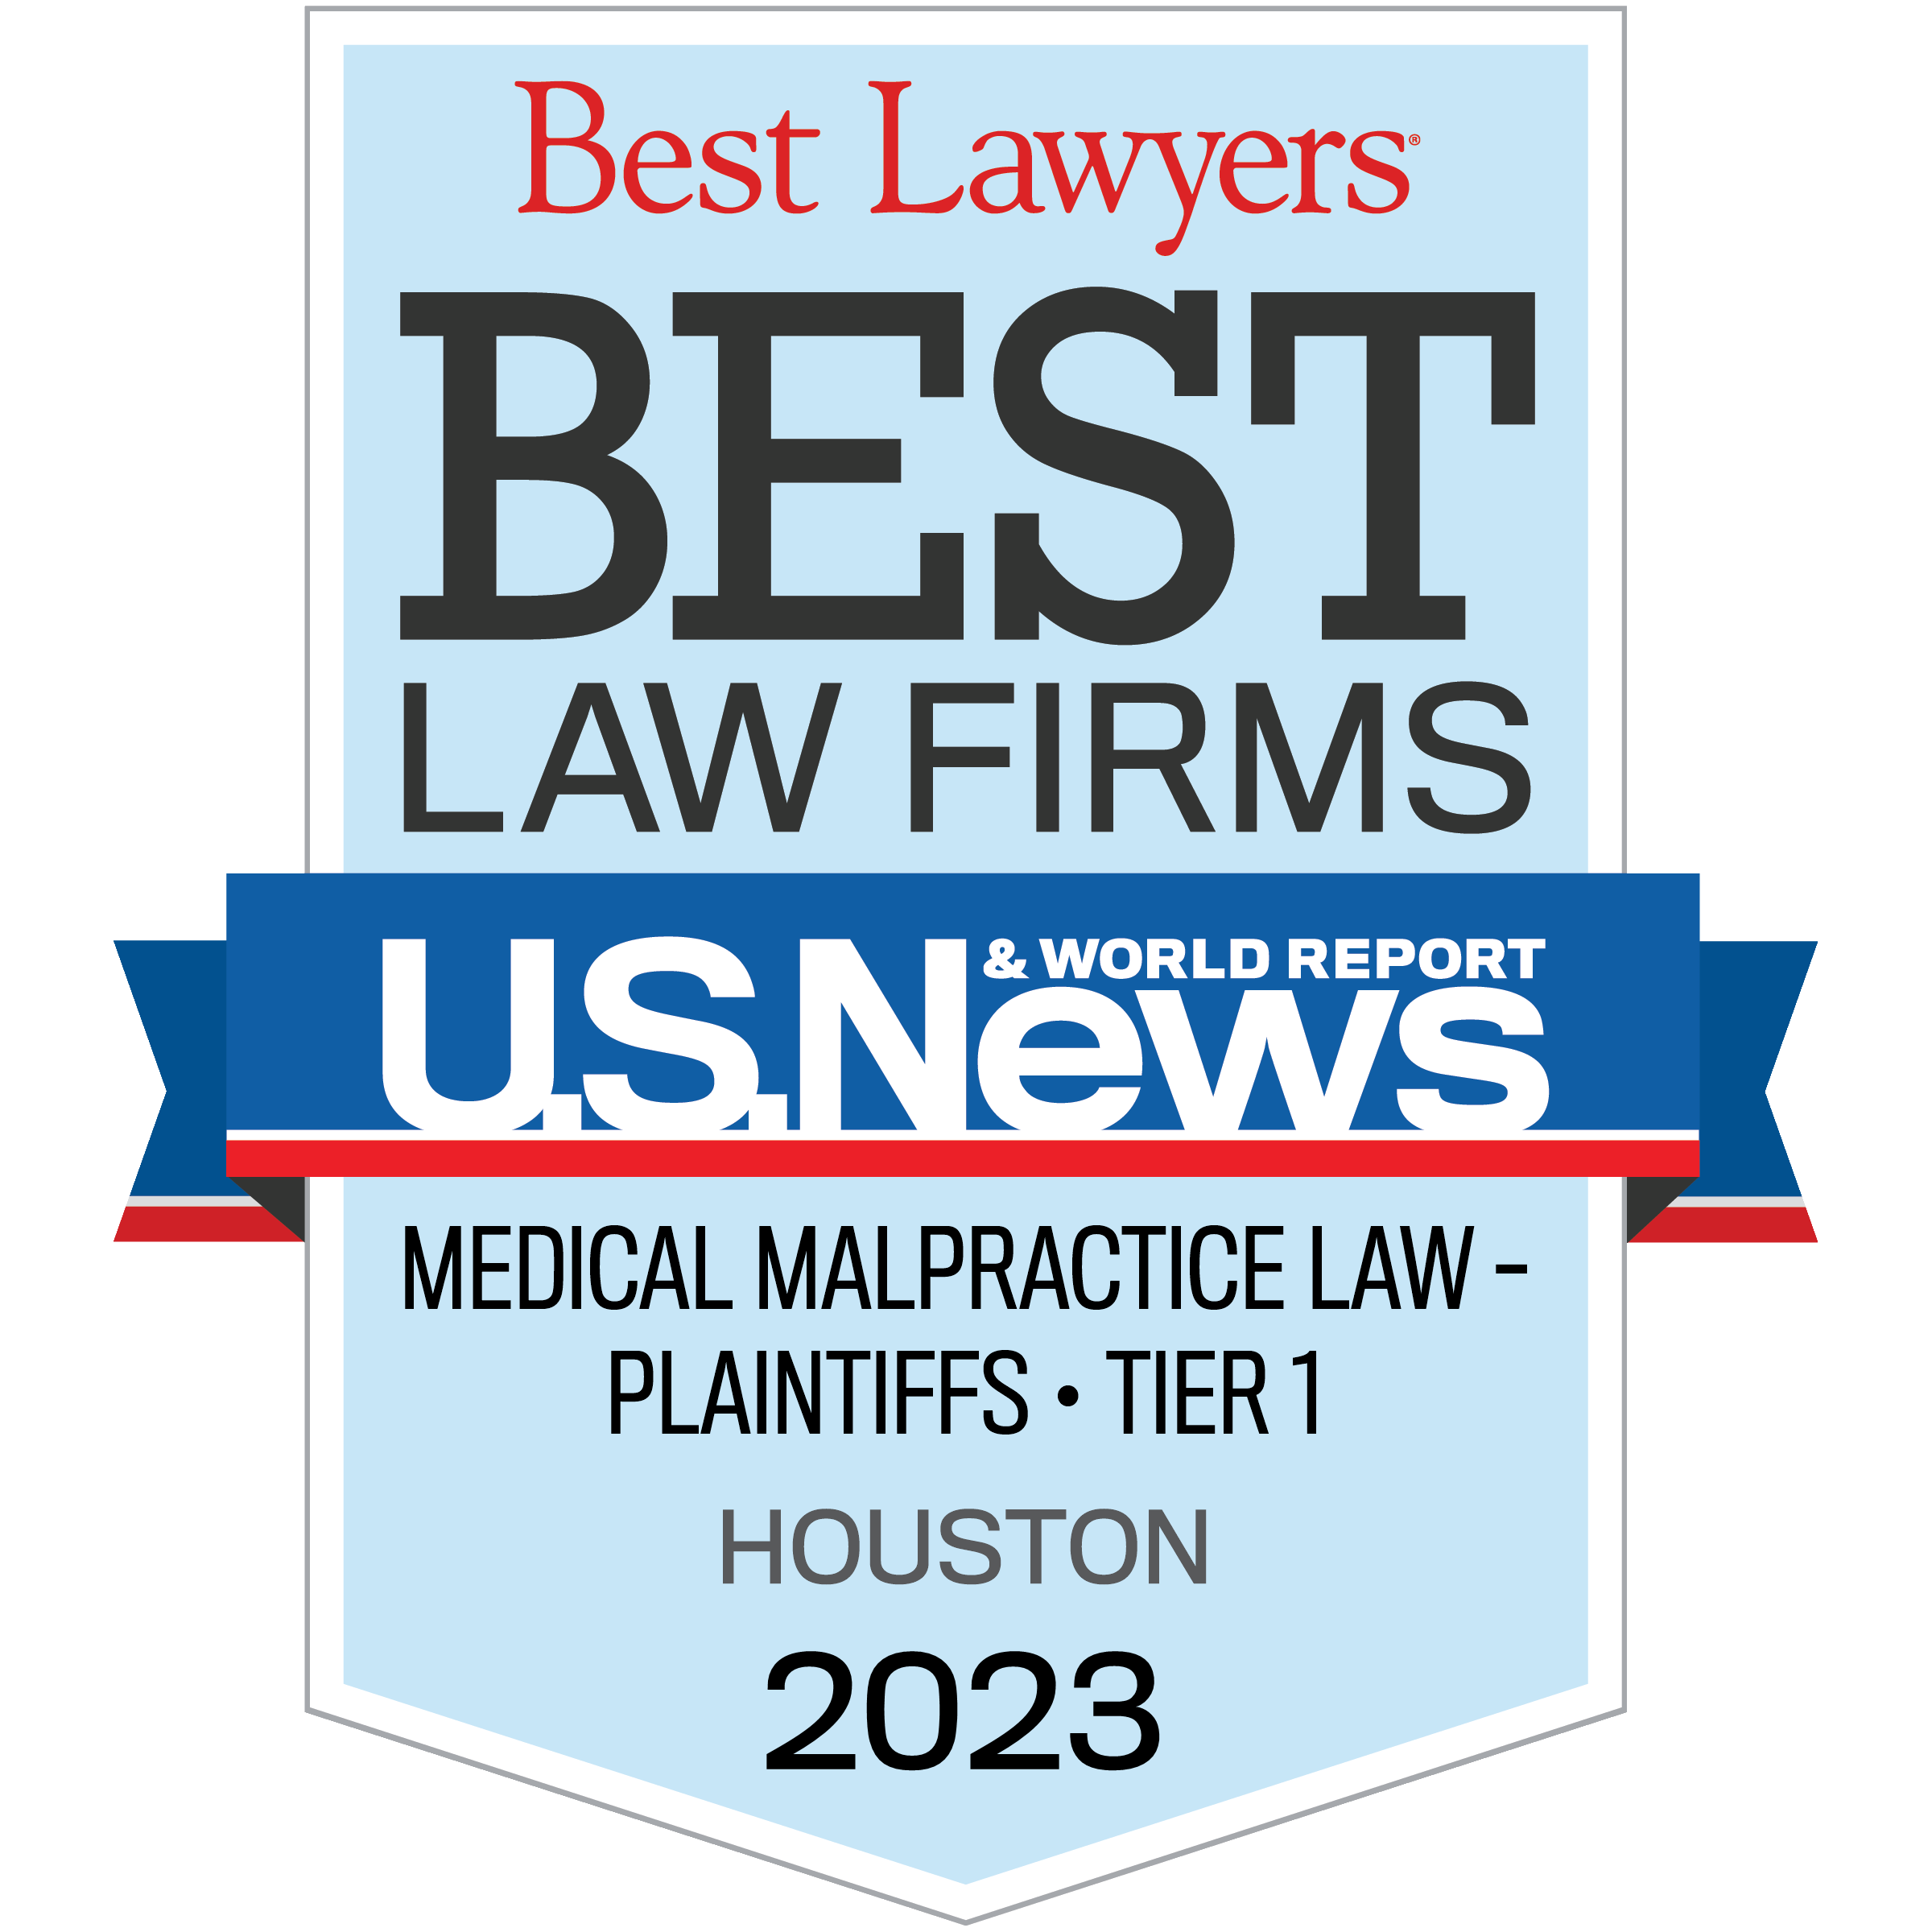 Blue US News badge with text: Best Law Firms Medical Malpractice Law Plaintiffs Tier 1 Houston 2023